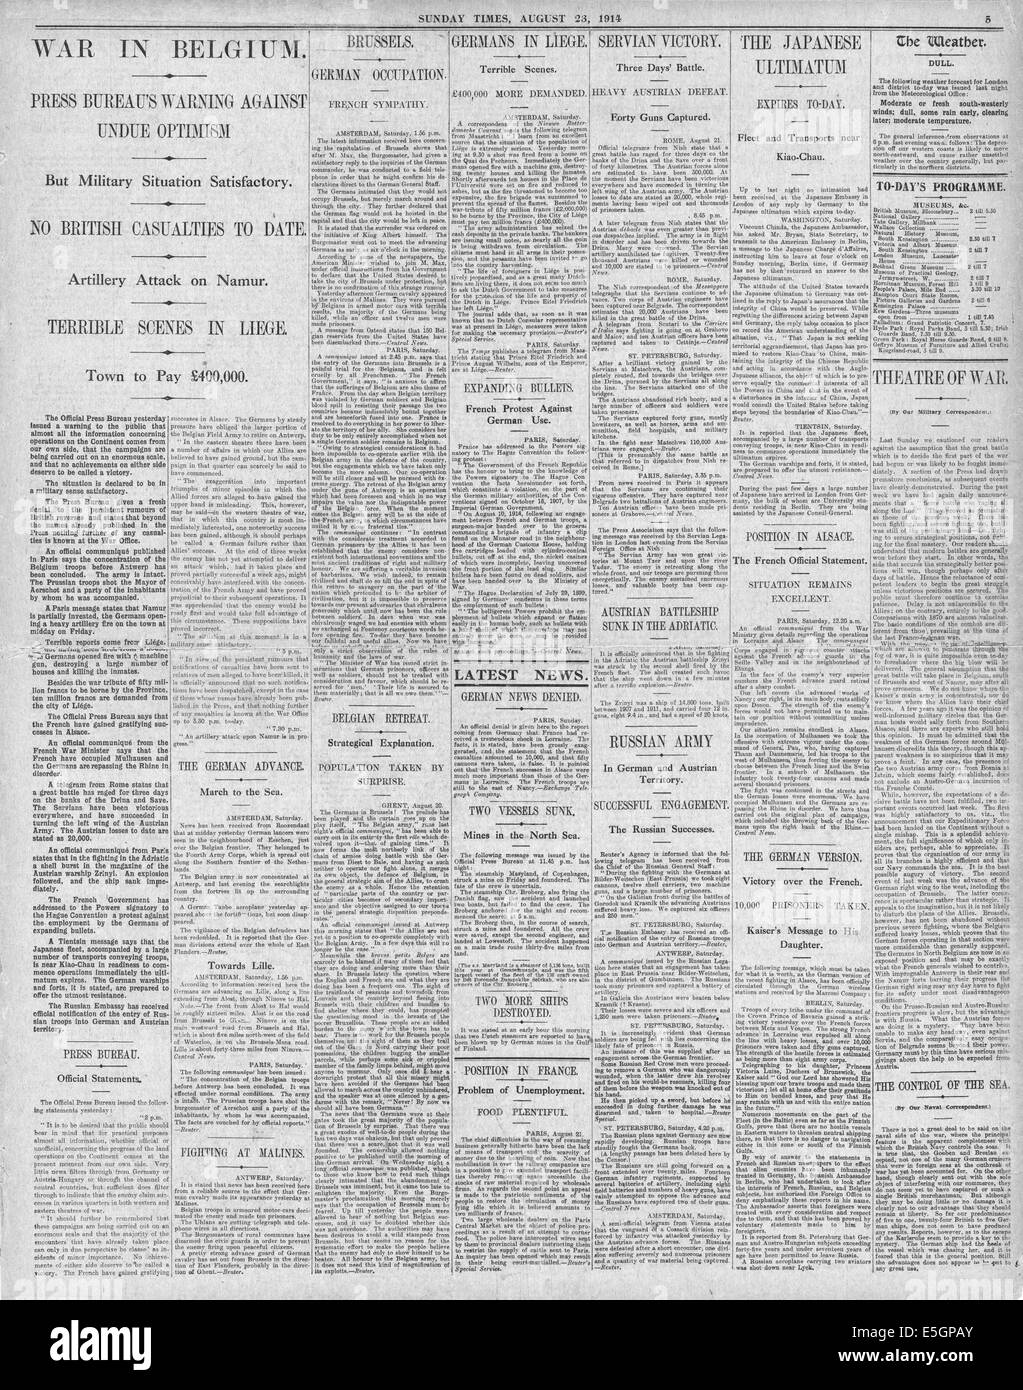 1914 Sunday Times page 5 reporting War in Belgium, Liege captured Stock Photo